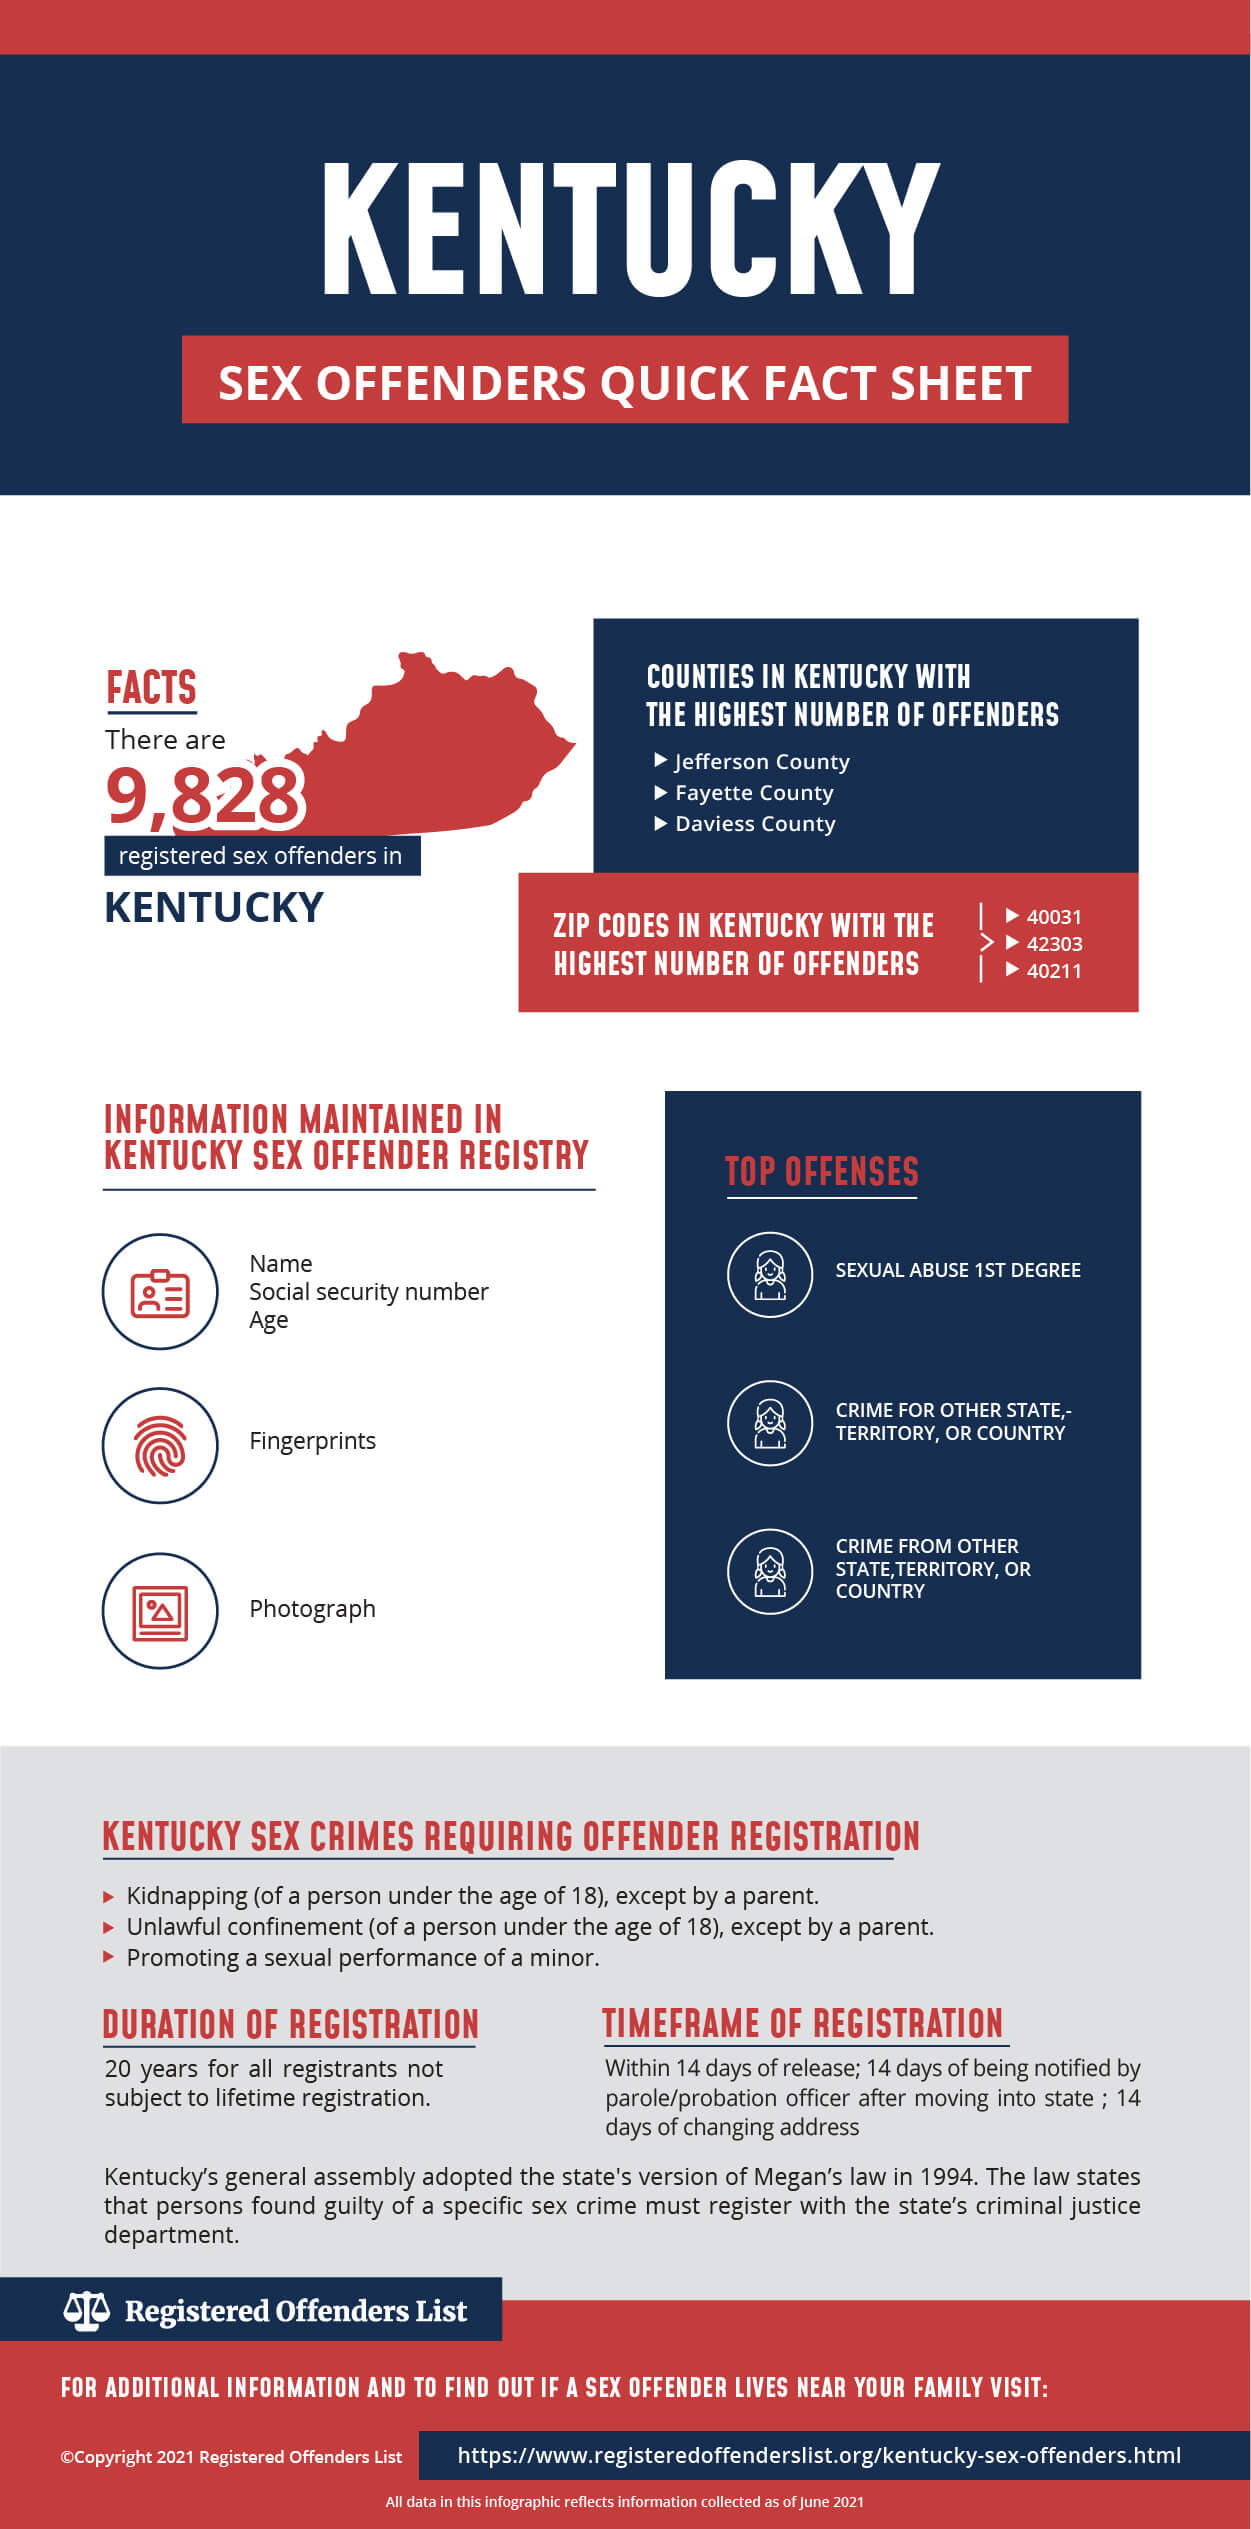 Registered Offenders List Find Sex Offenders In Kentucky